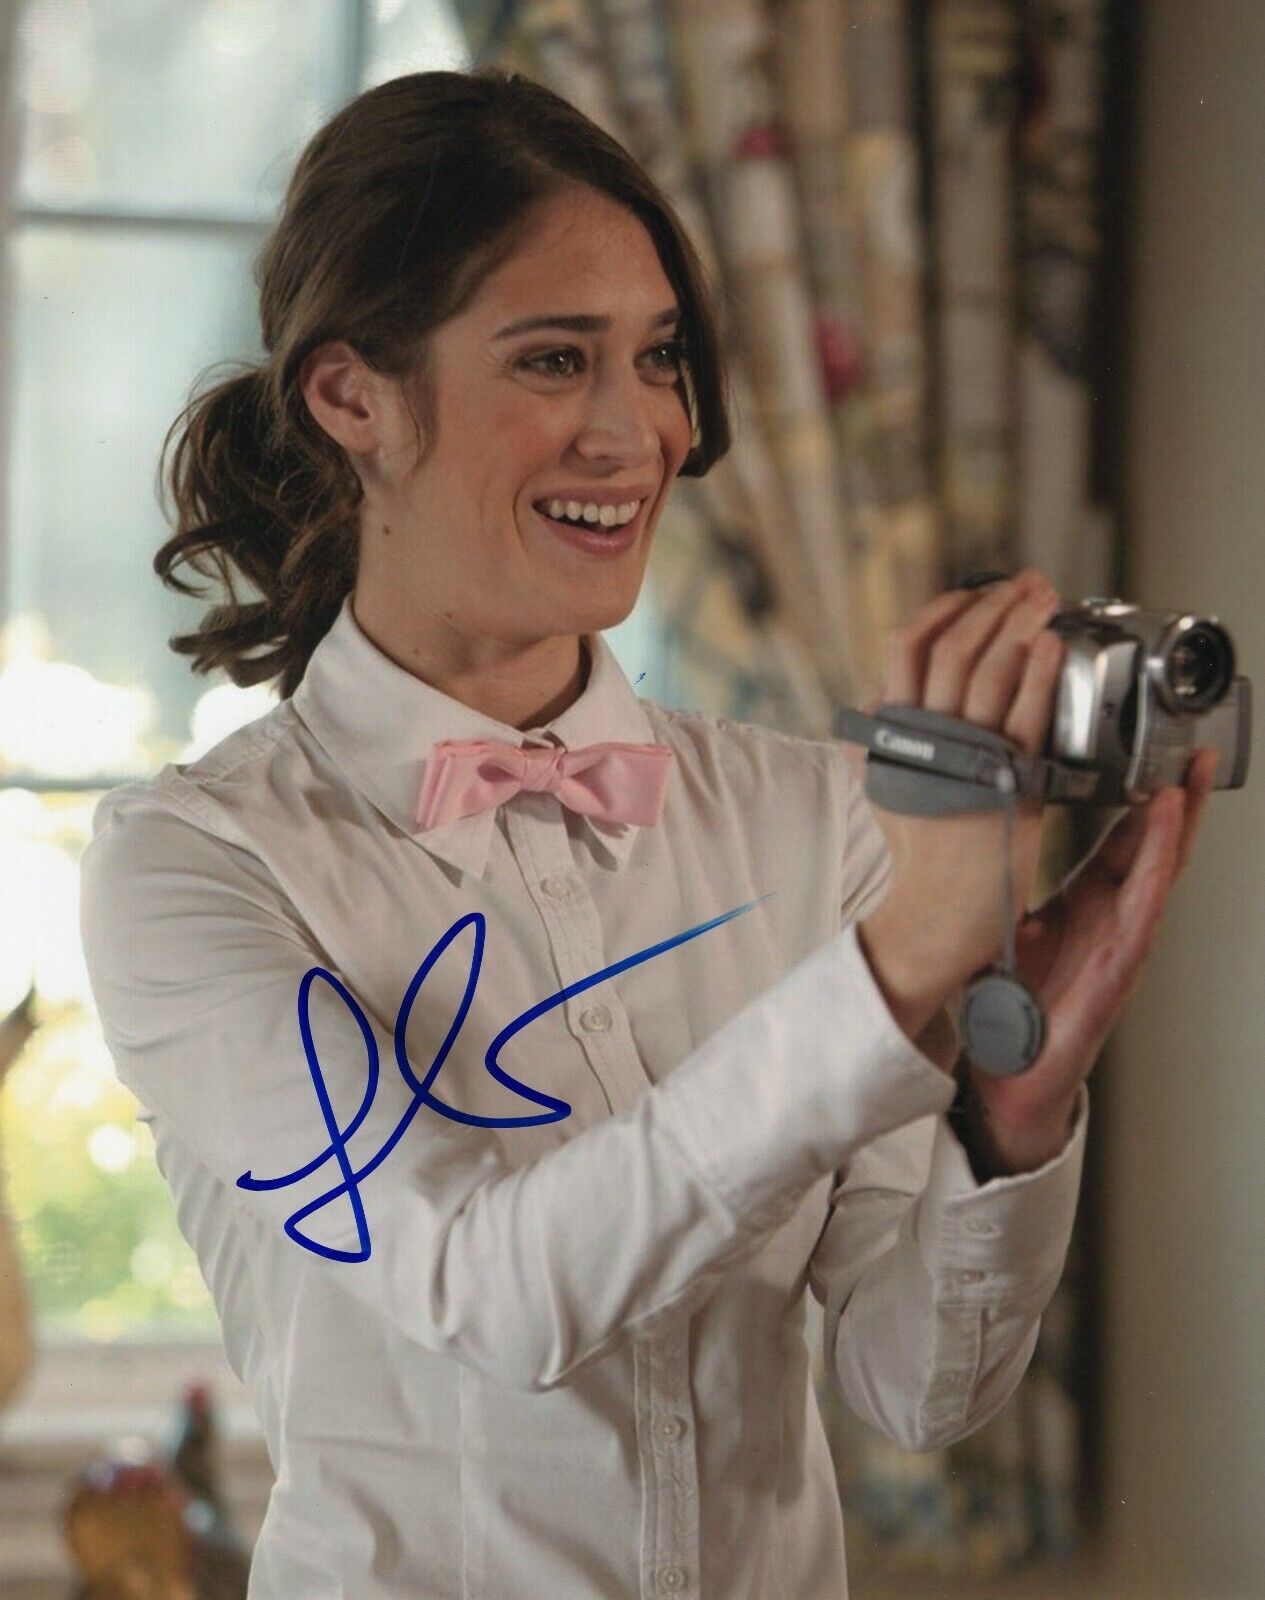 Lizzy Caplan Signed 8x10 Photo Poster painting w/COA Mean Girls Cloverfield